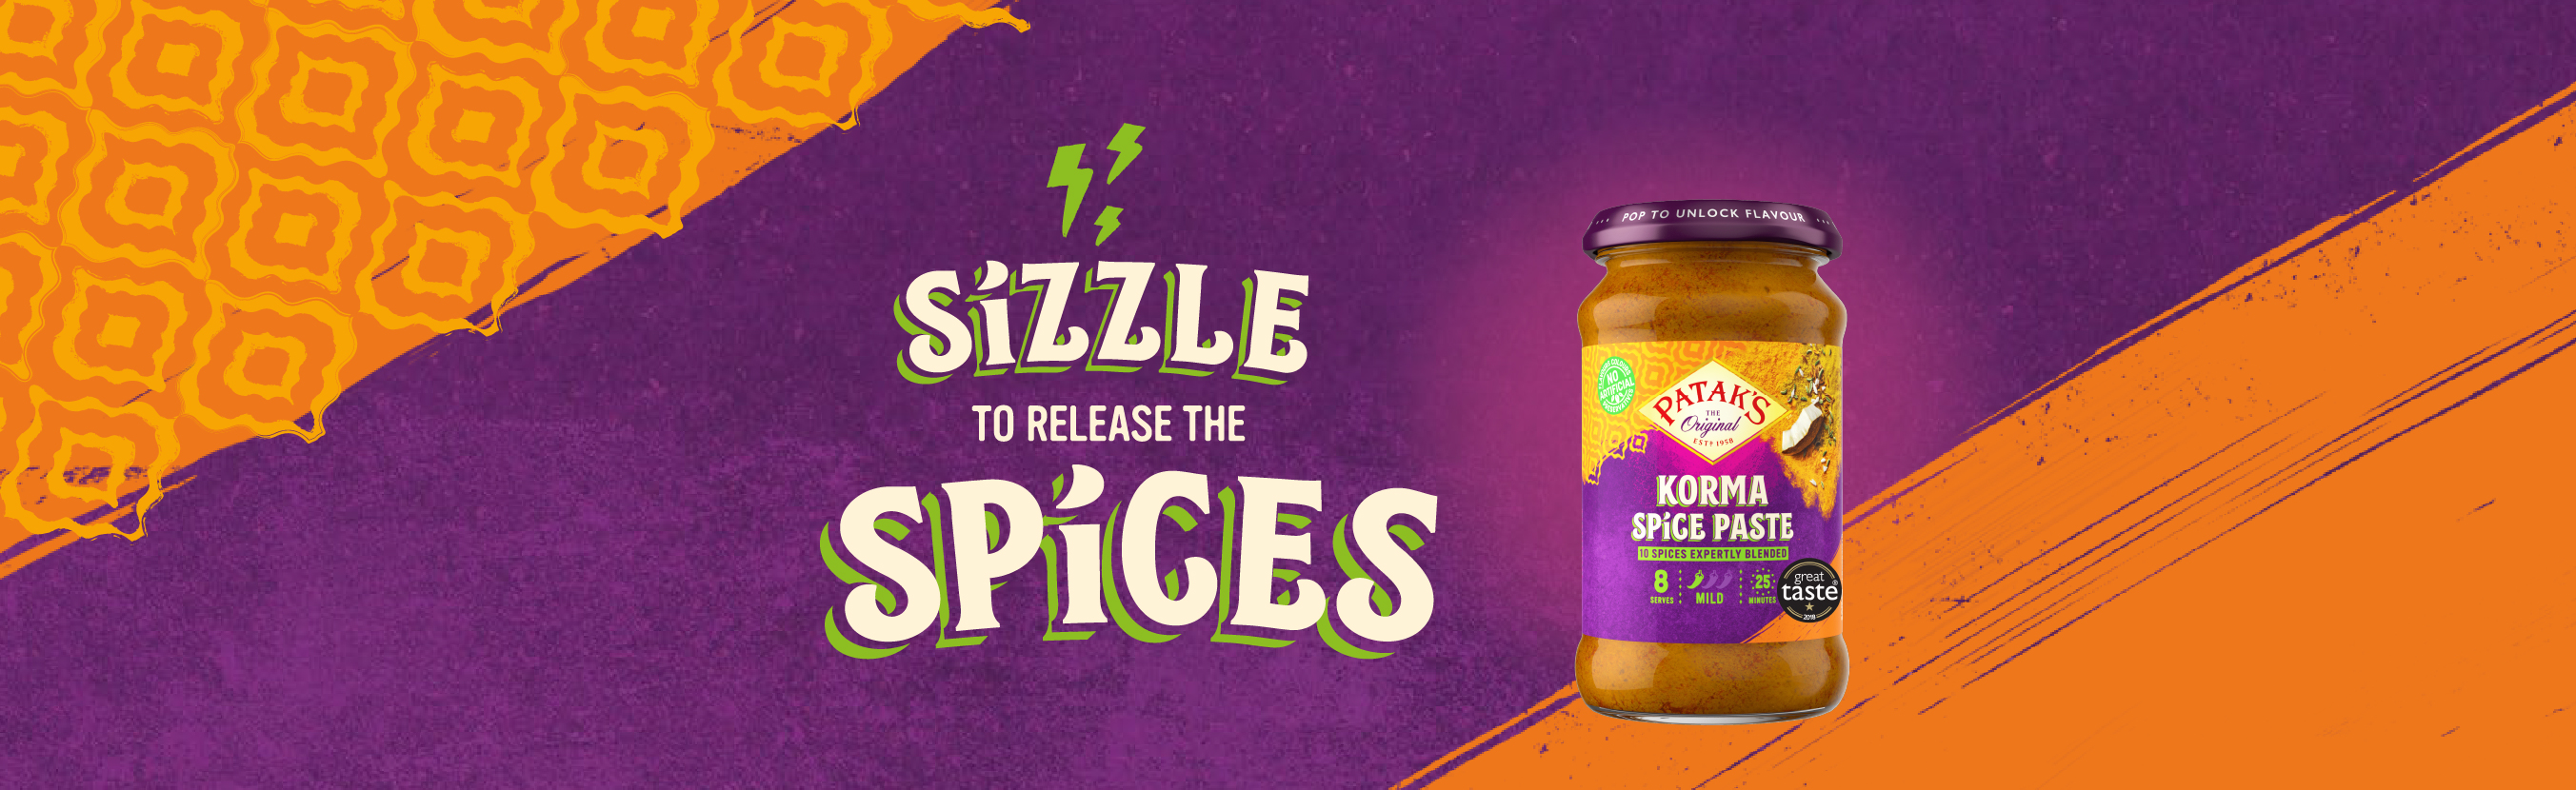 spice-pastes banner image